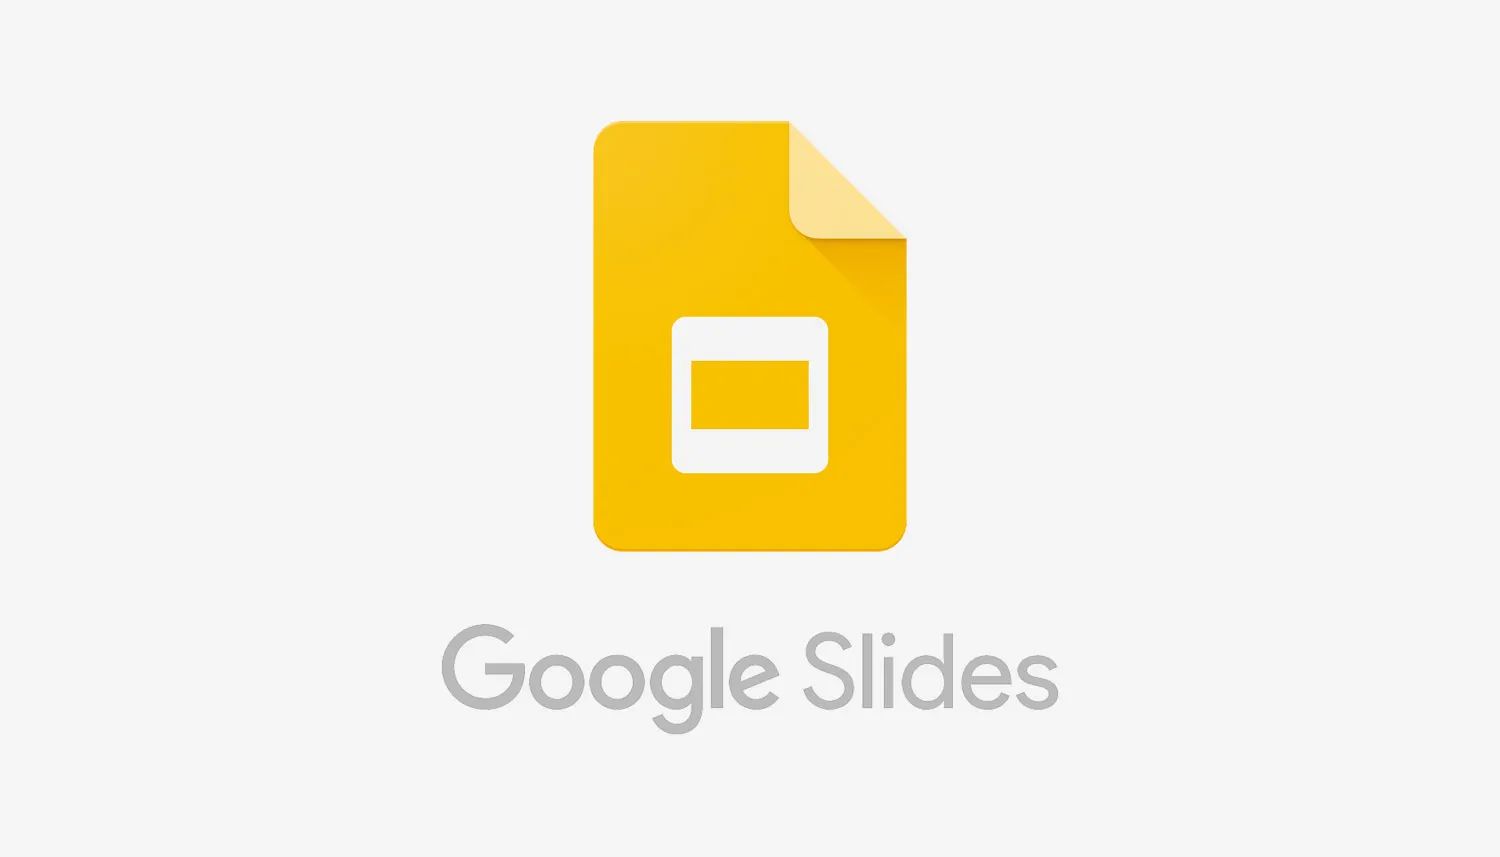 How To Download A Image From Google Slides